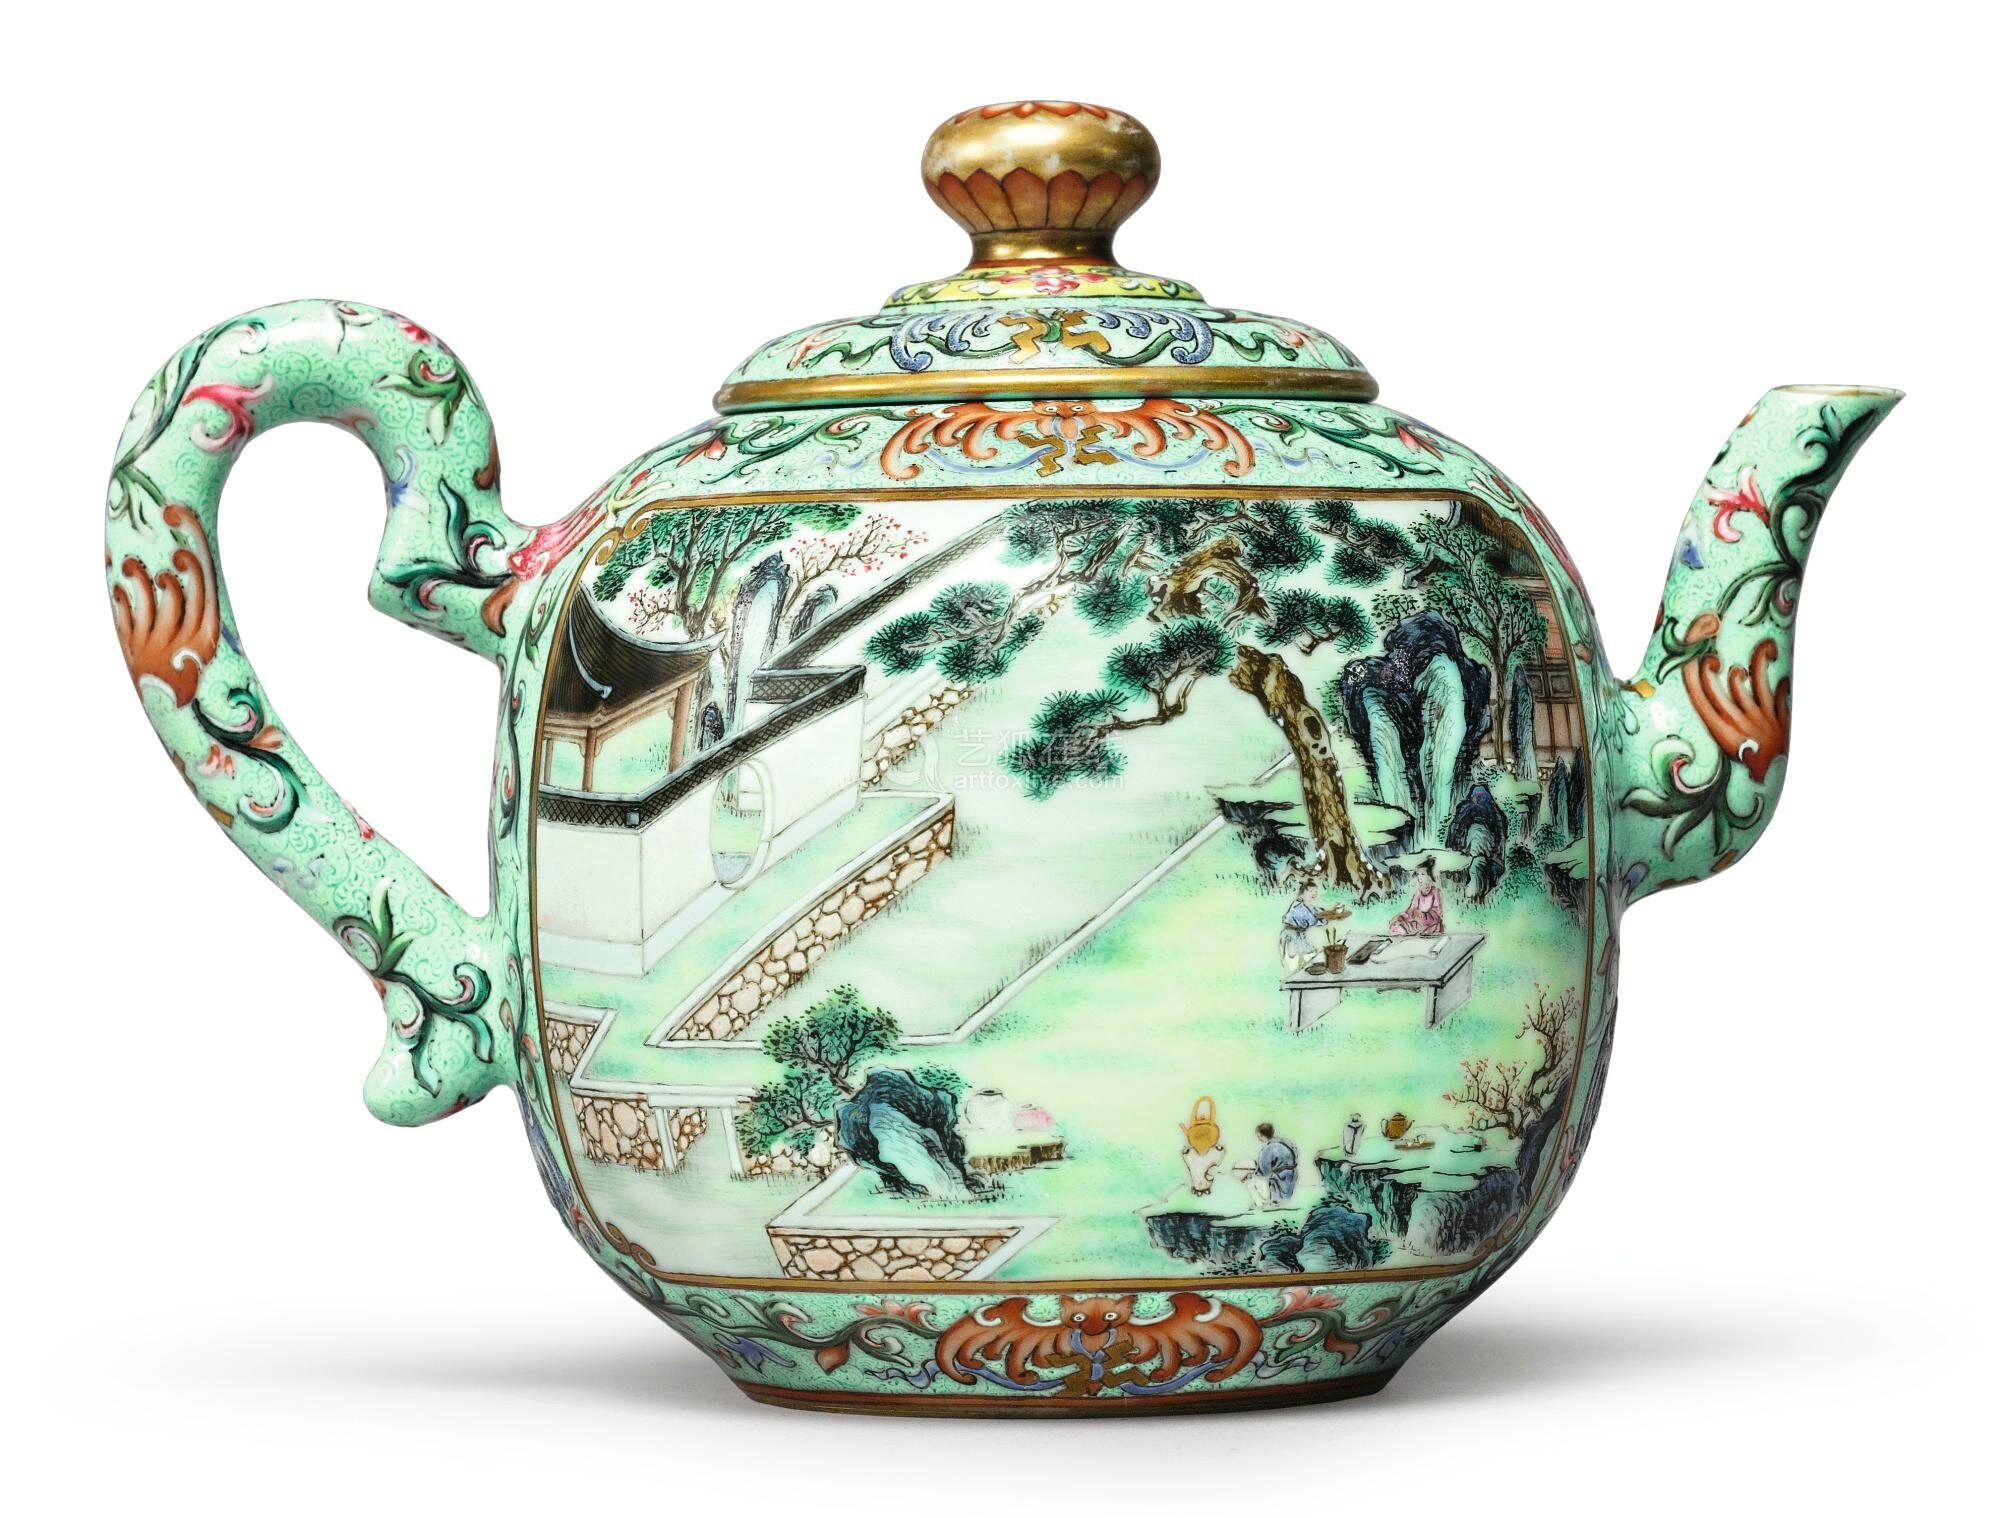 The Top 20 Chinese Ceramics Sold in 2016 by Sotheby's - Alain.R.Truong